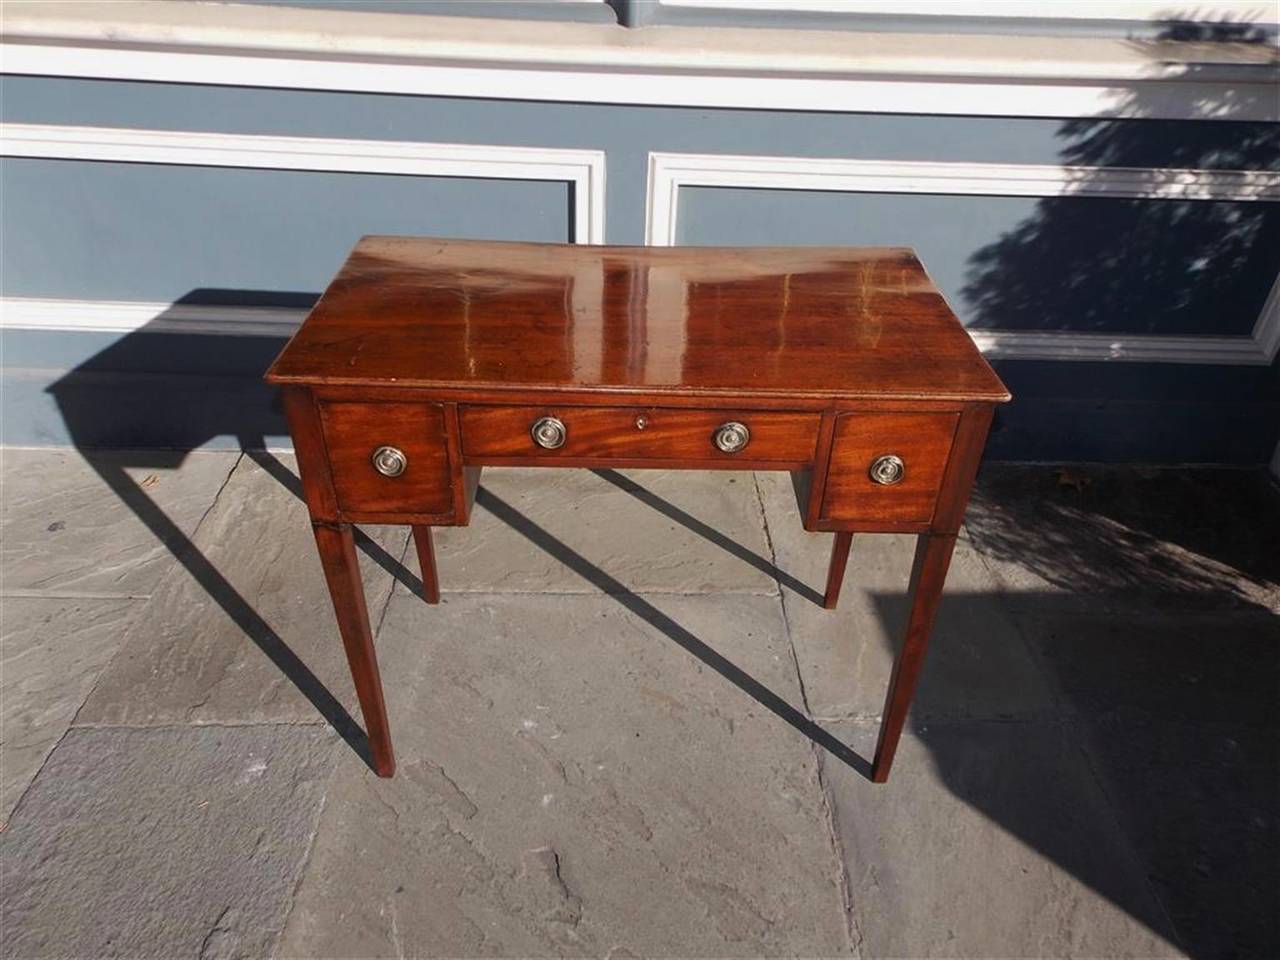 English Hepplewhite mahogany three drawer writing table with circular brasses and terminating on squared tapered legs.  Late 18th Century